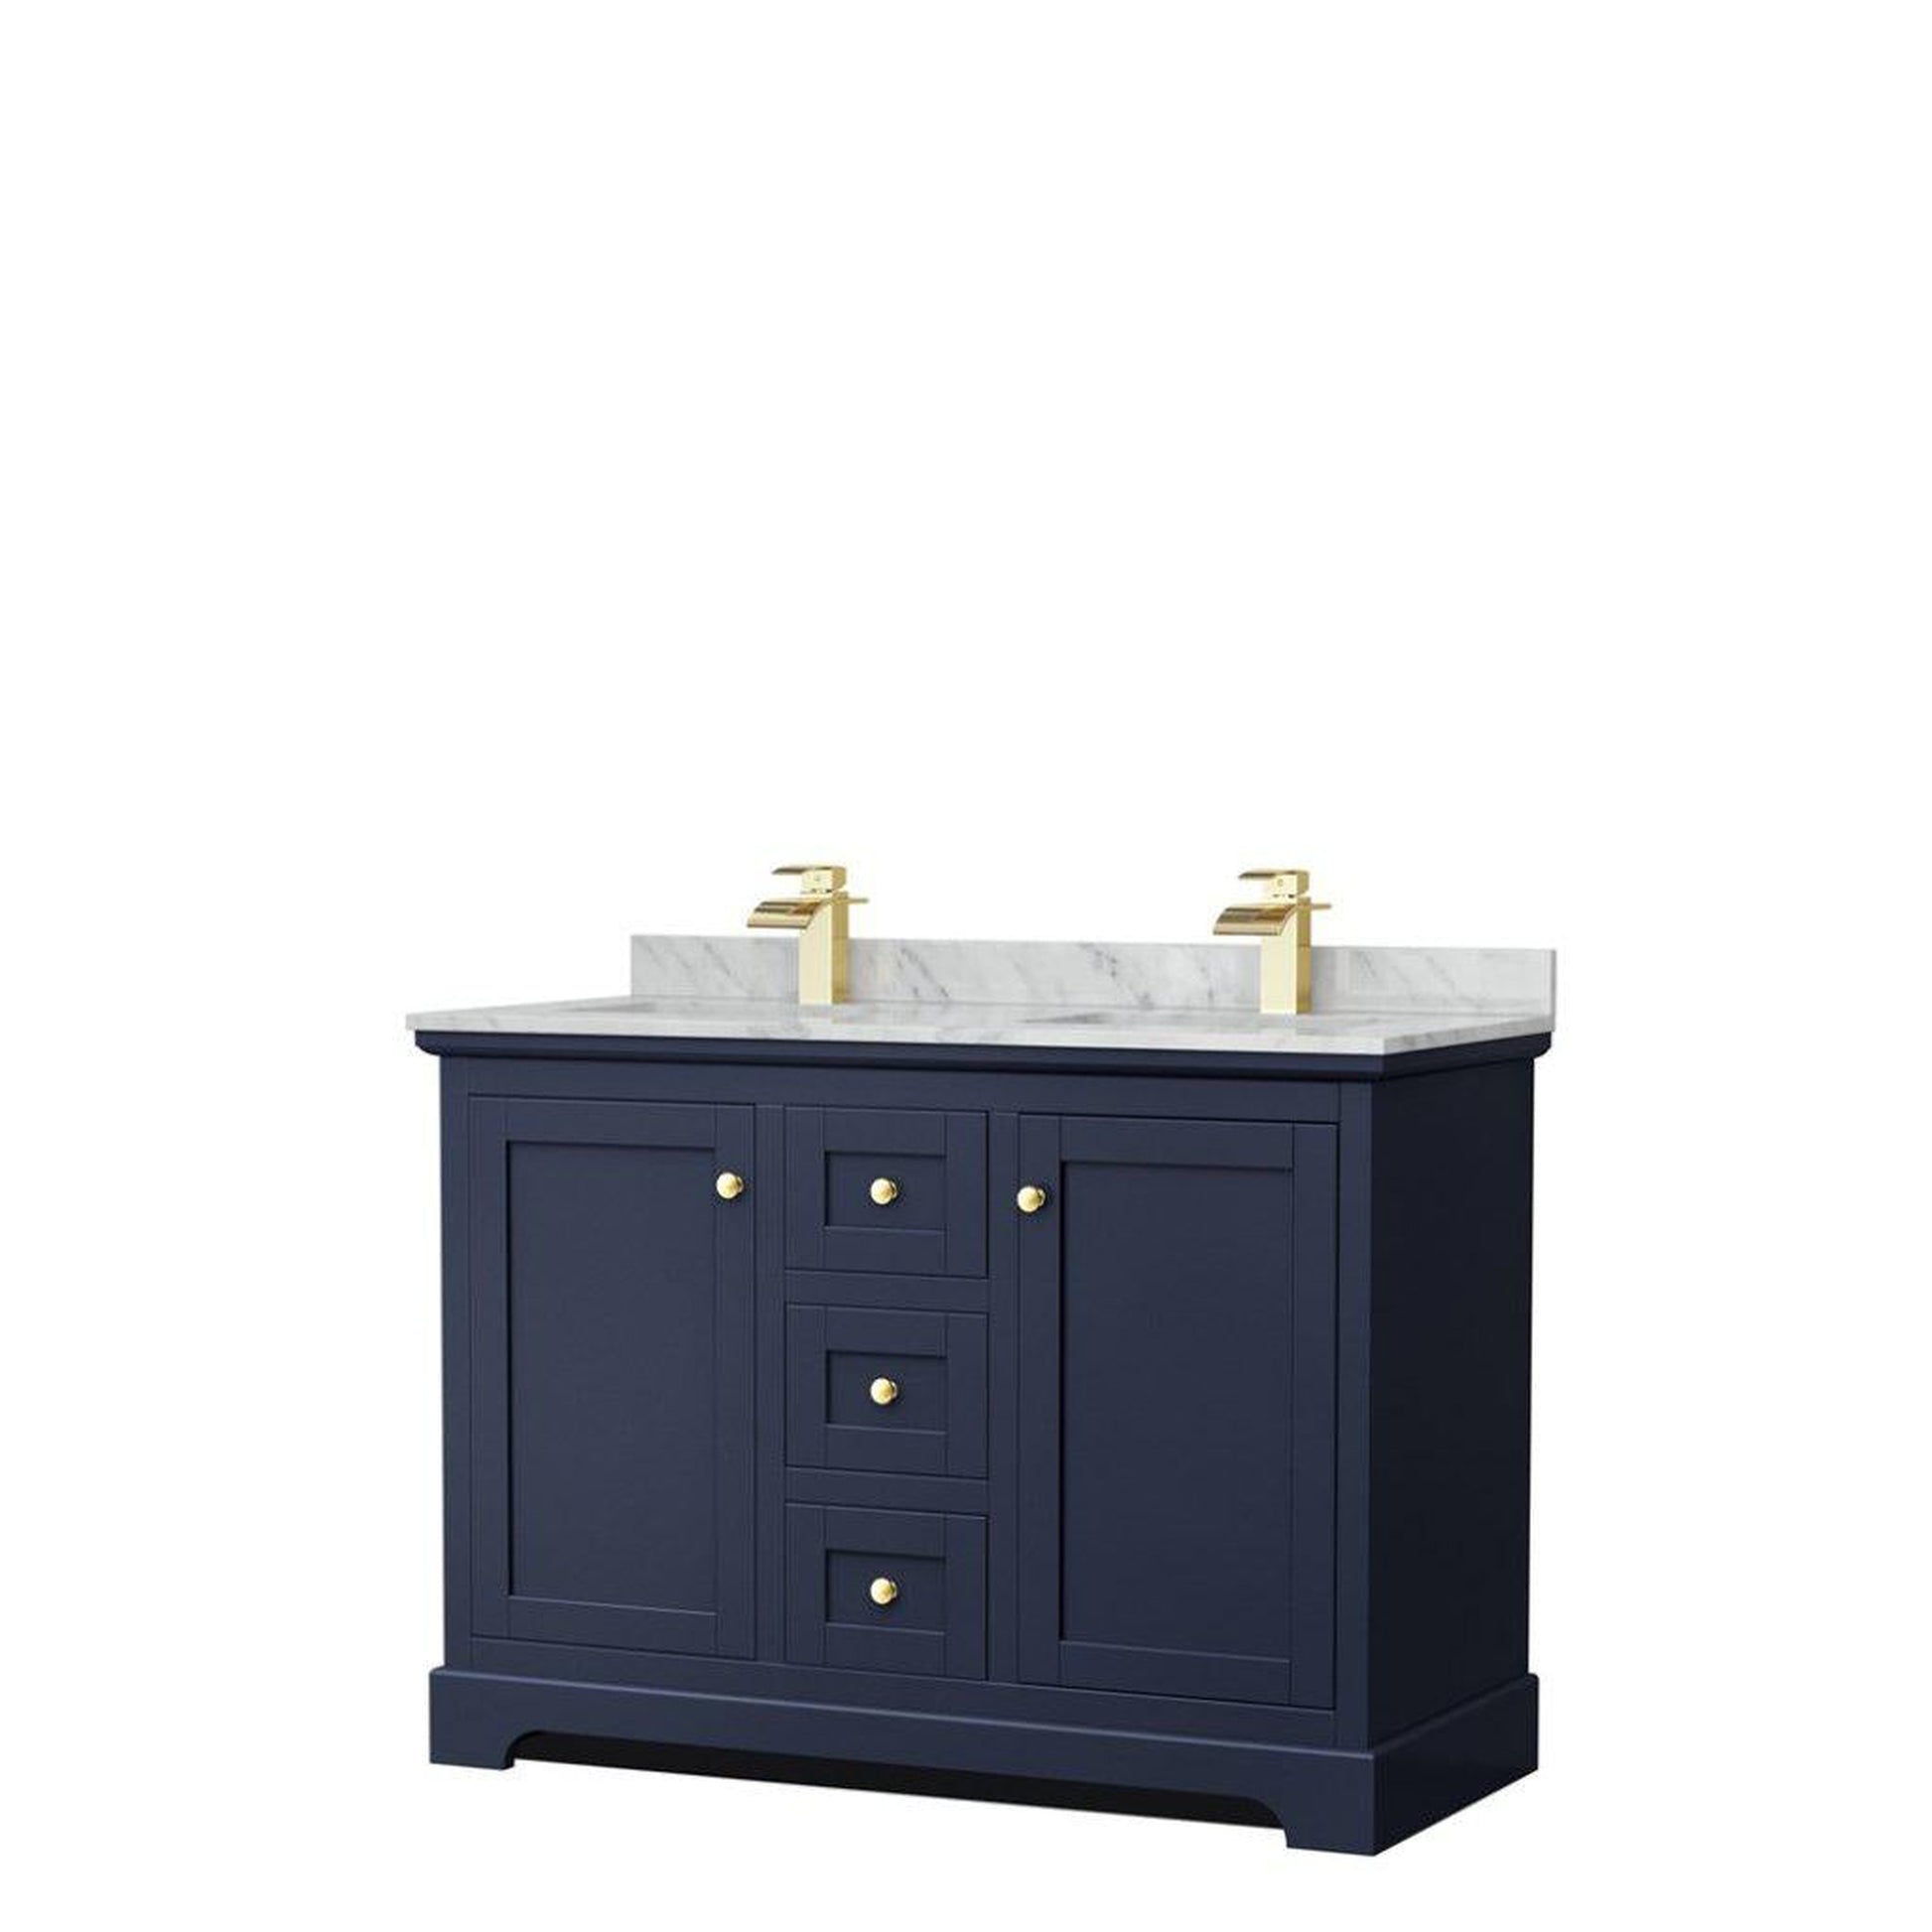 Wyndham Collection Avery 48" Dark Blue Double Bathroom Vanity With White Carrara Marble Countertop With 1-Hole Faucet And Square Sink